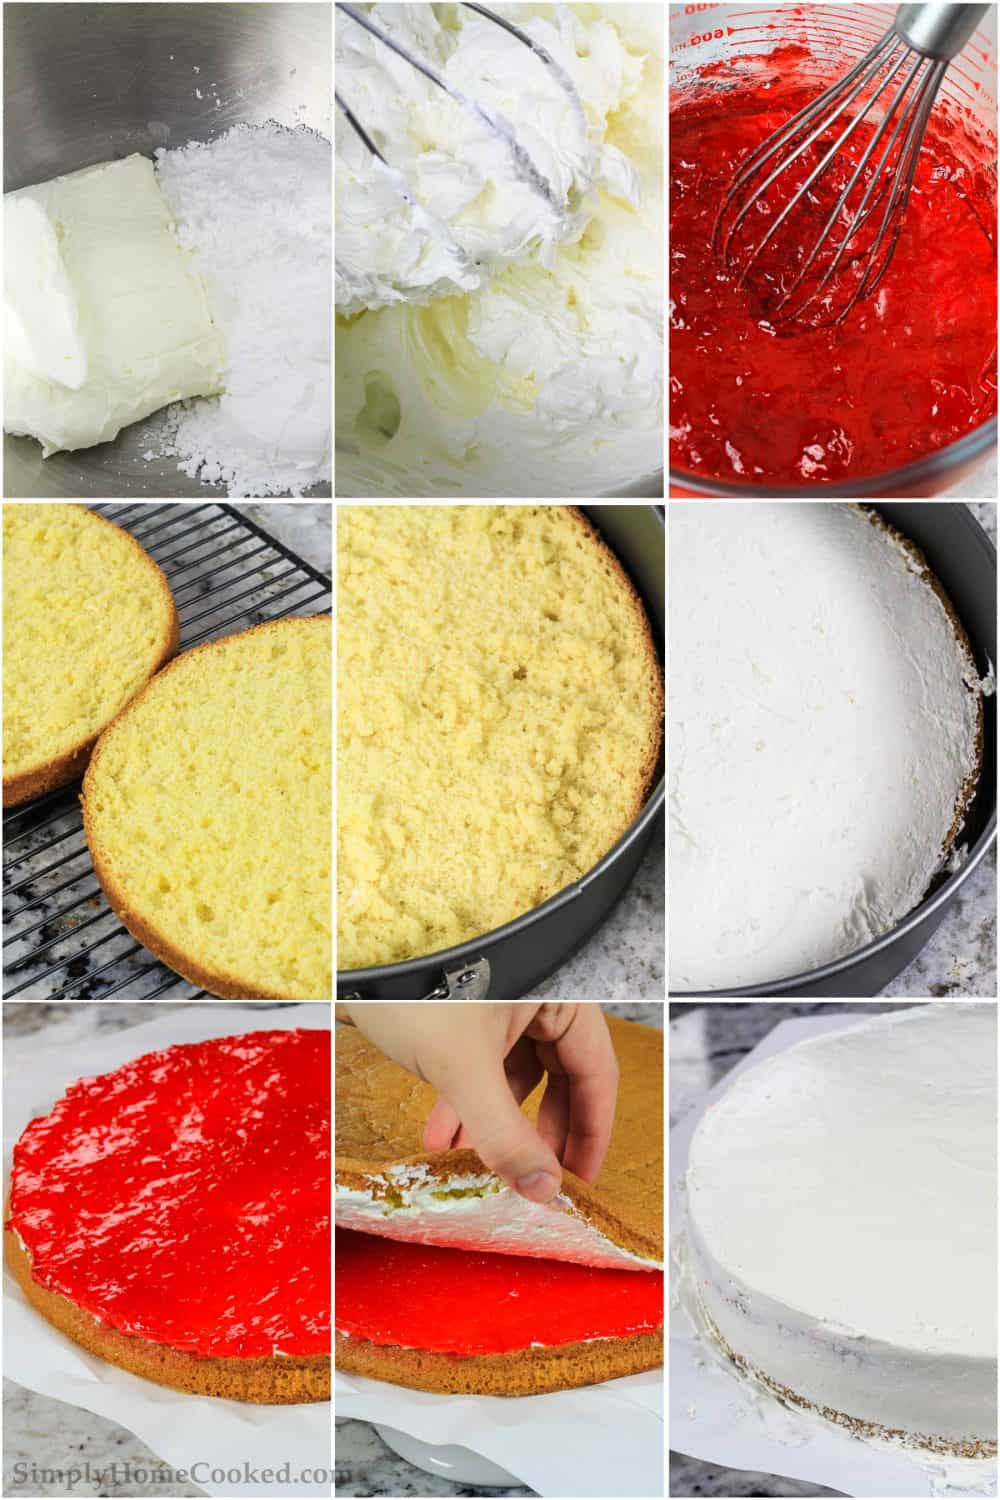 Step by step photo collage of mixing cream cheese and Jello layers for this cherry Jello cake recipe